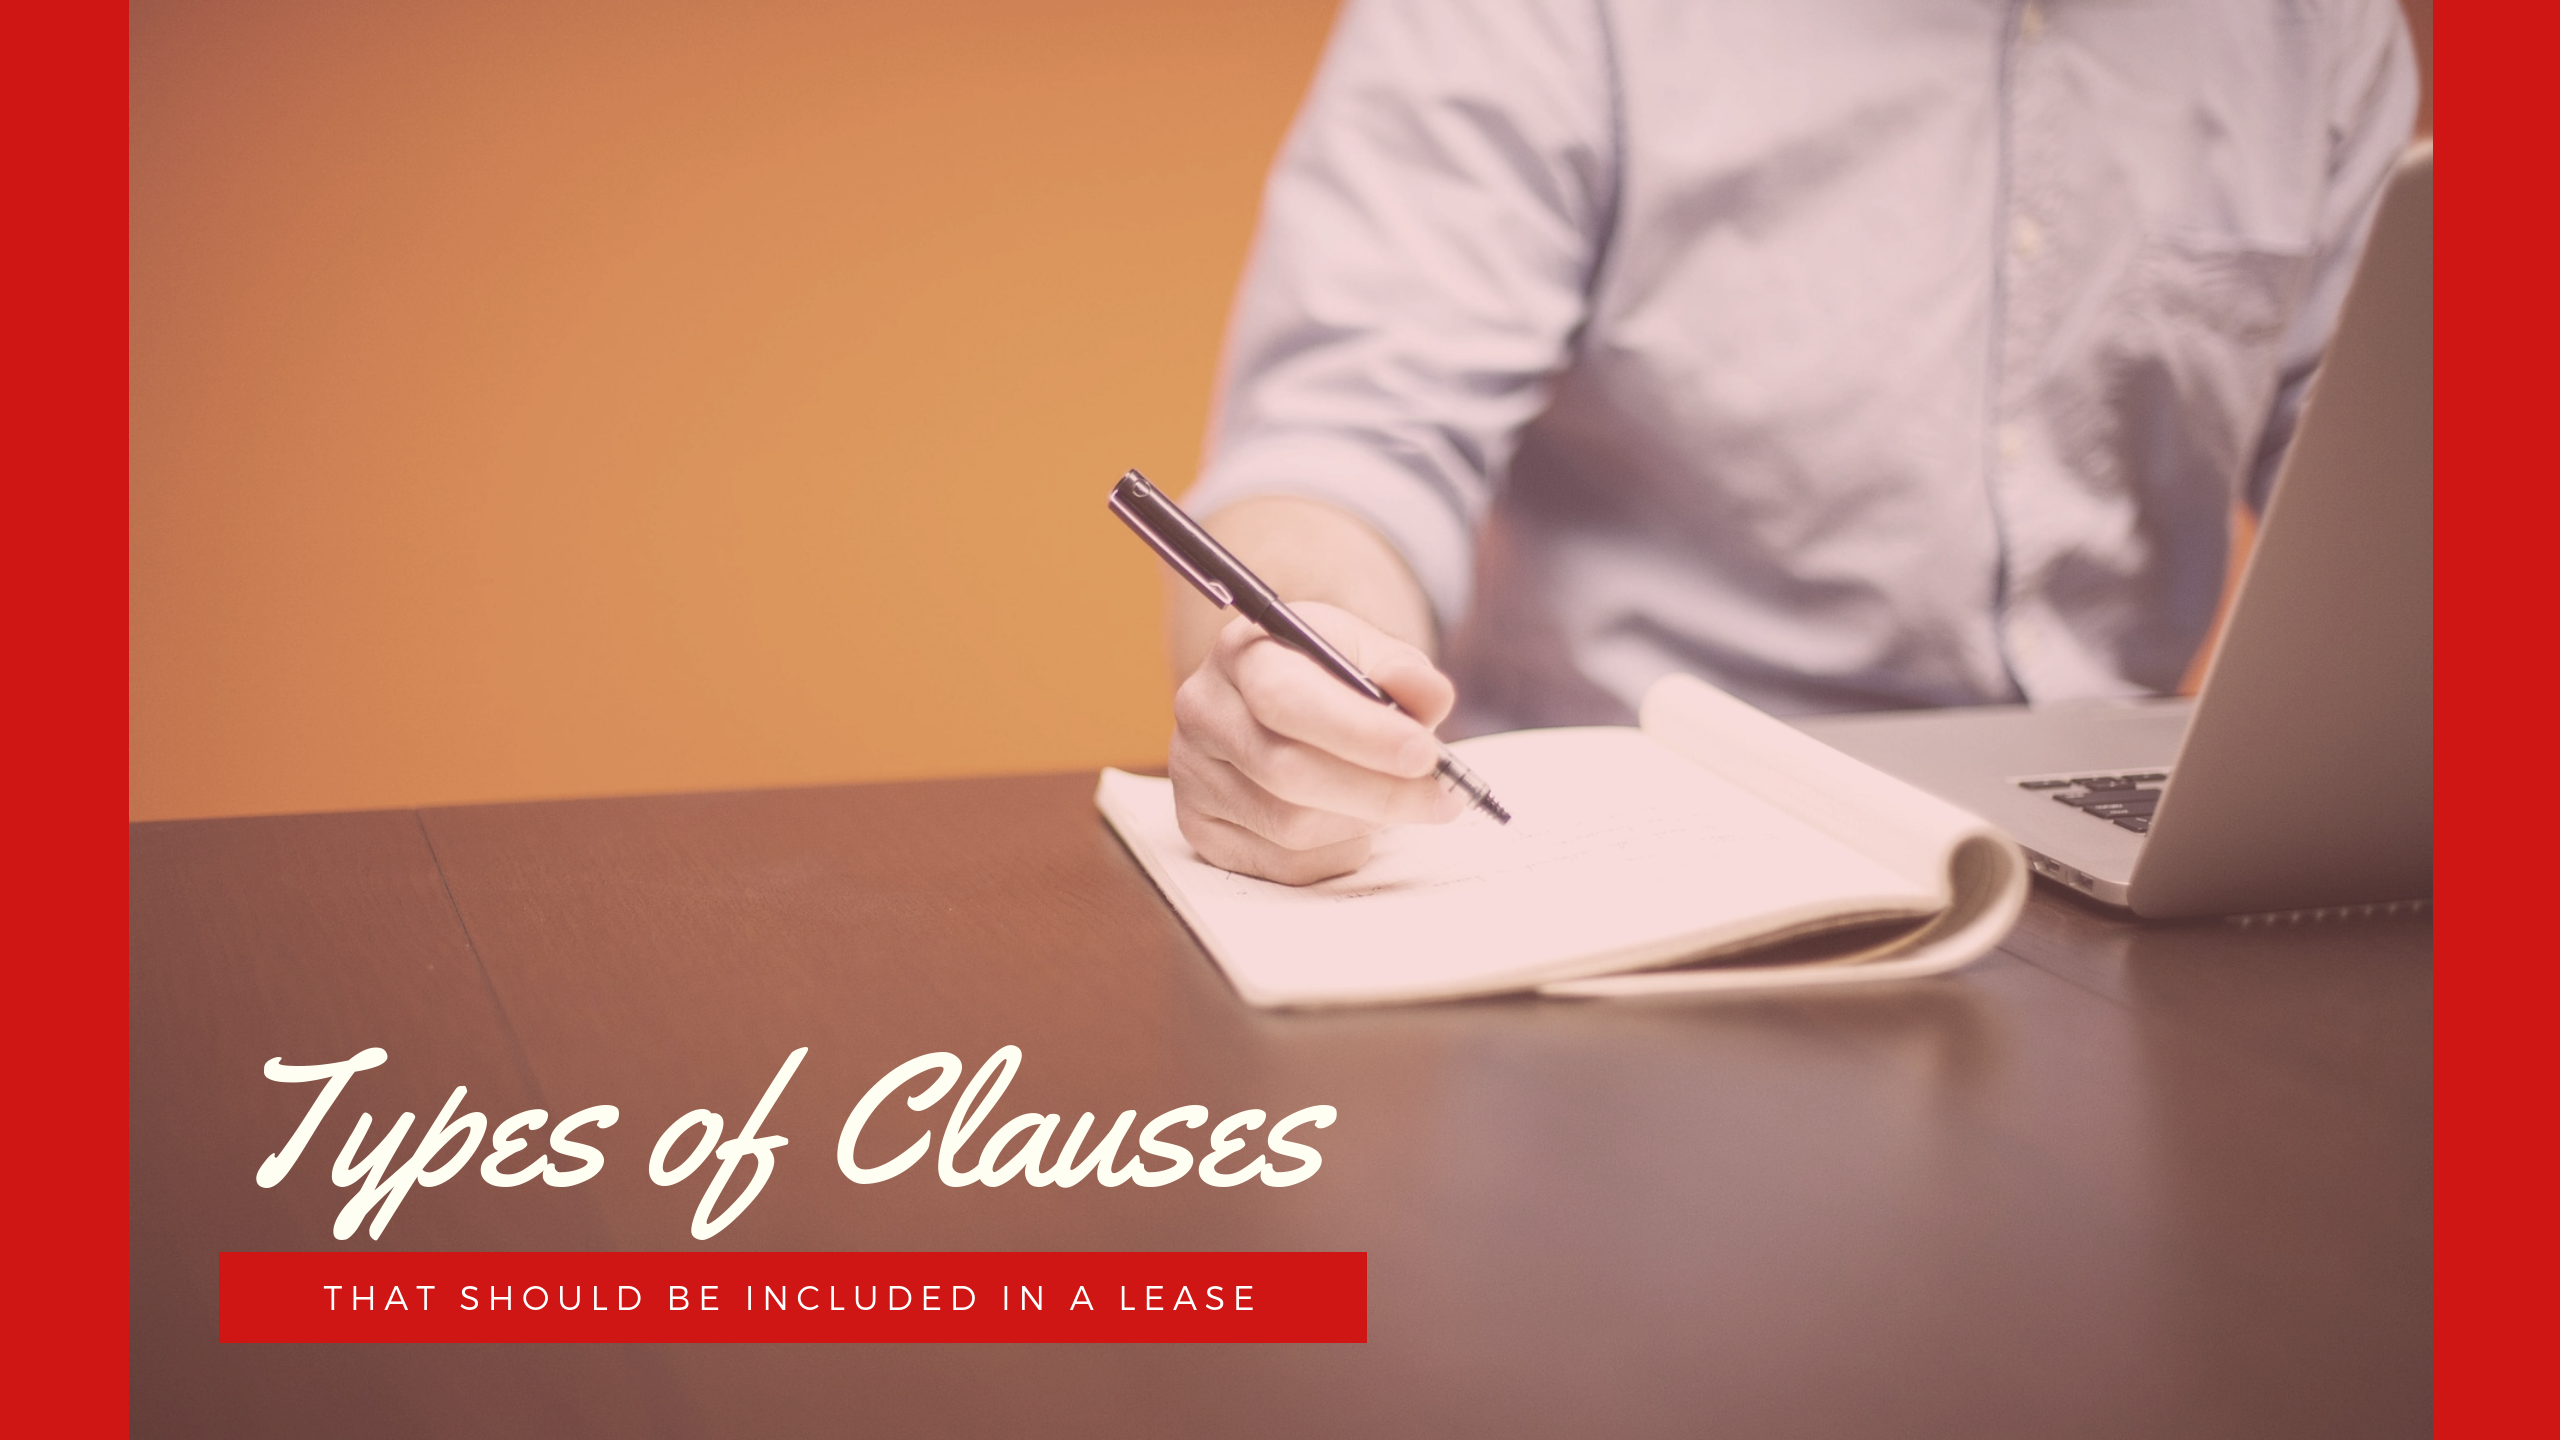 What Types of Clauses Should Be Included in a Lease in Colorado Springs?